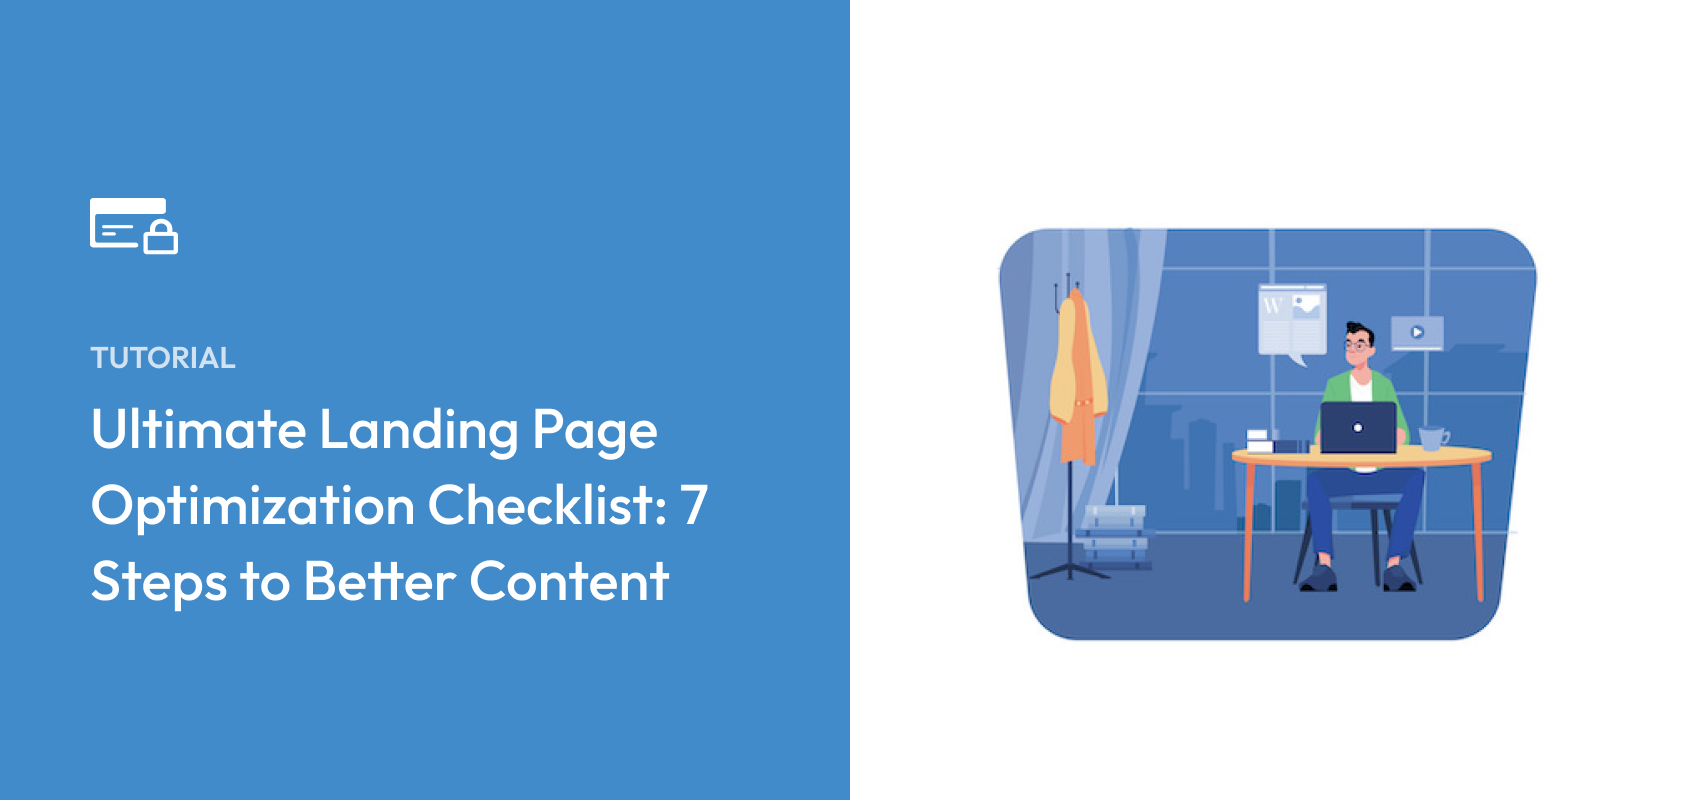 Ultimate Landing Page Optimization Checklist: 7 Steps to Better Content